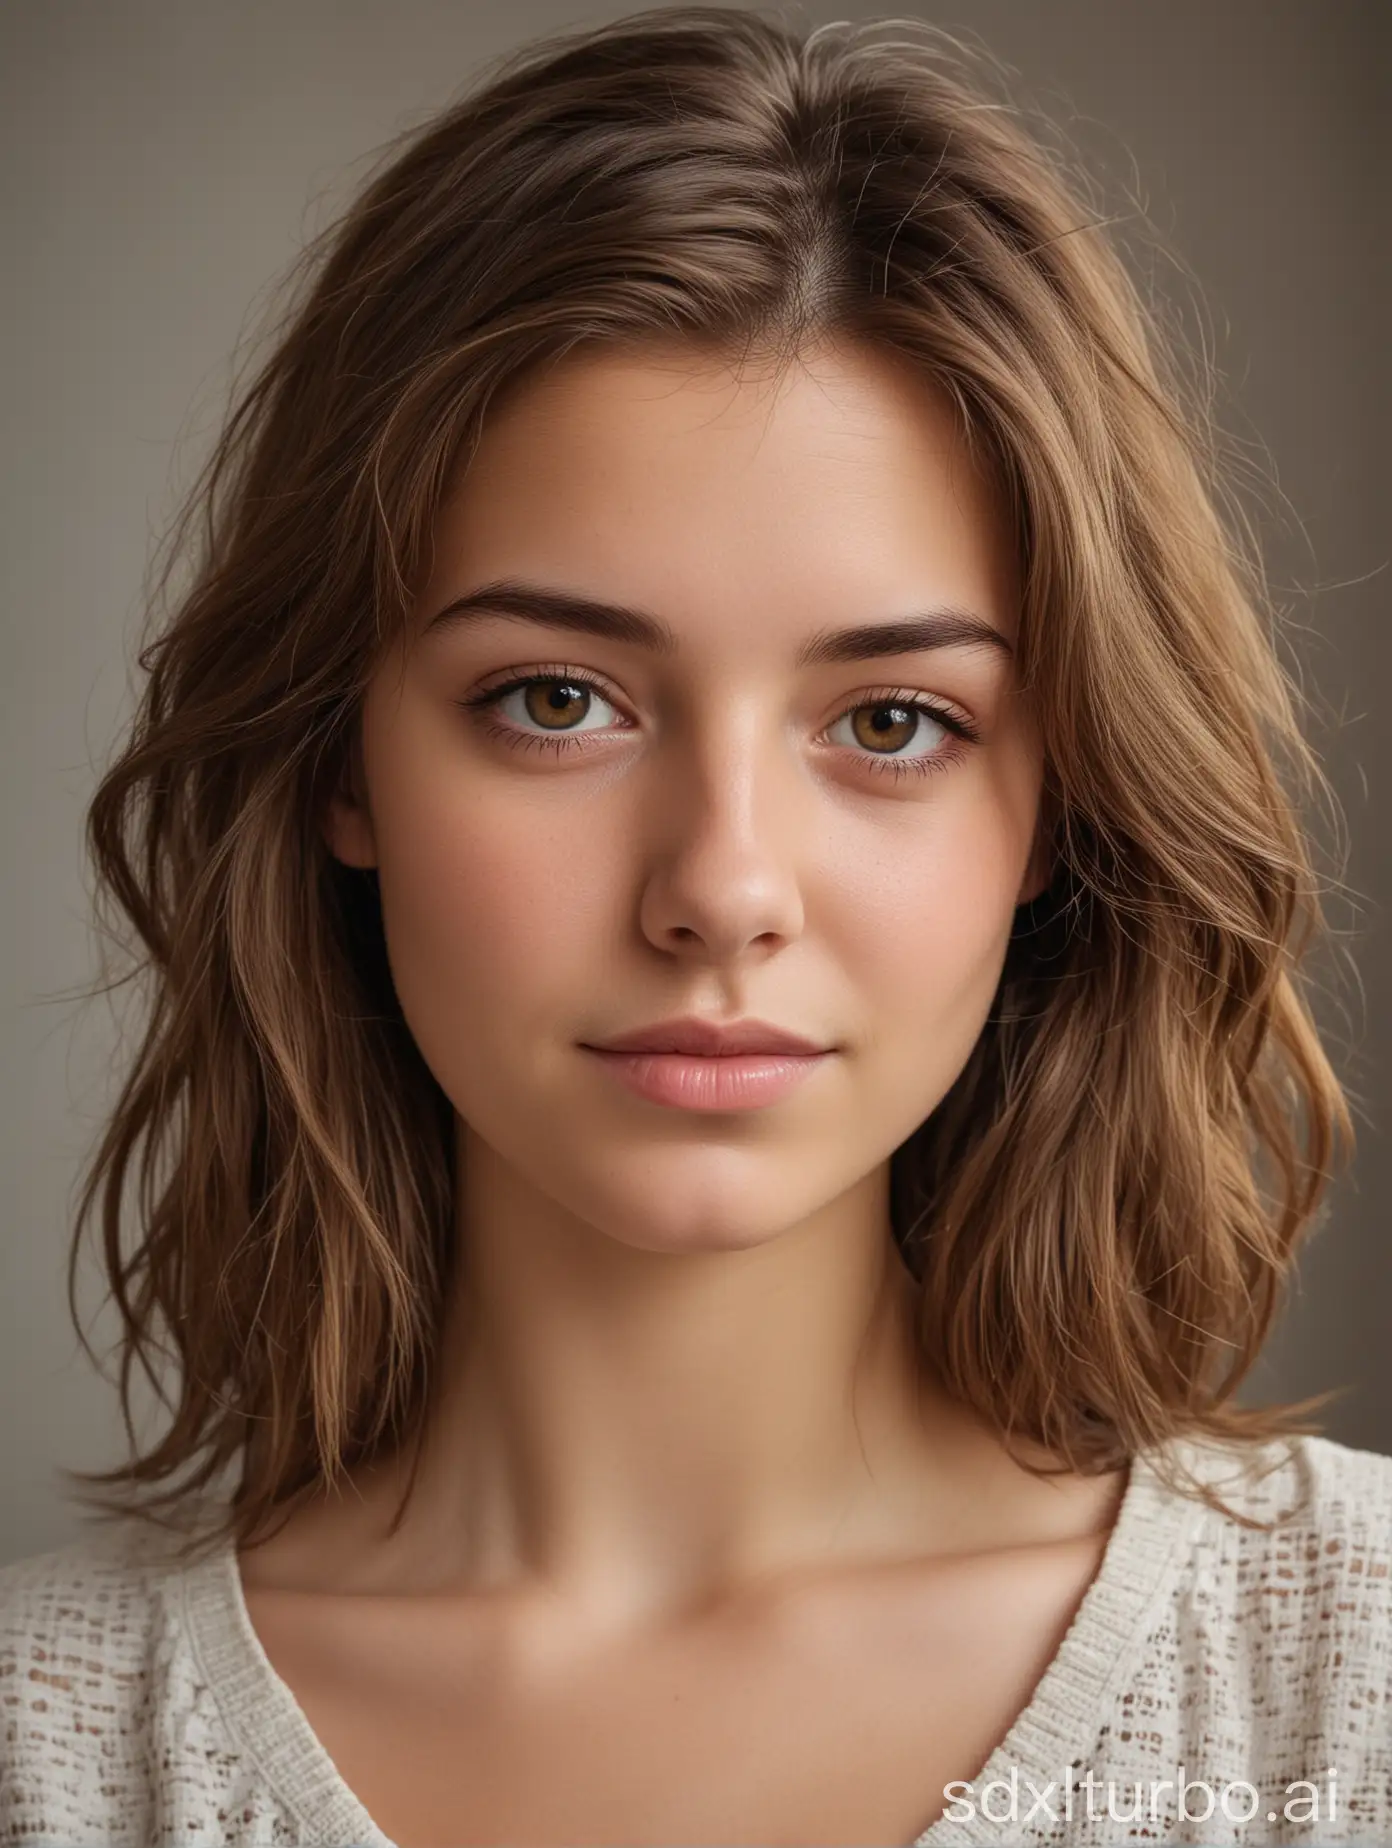 Portrait-of-Young-Woman-with-Medium-Brown-Hair-CloseUp